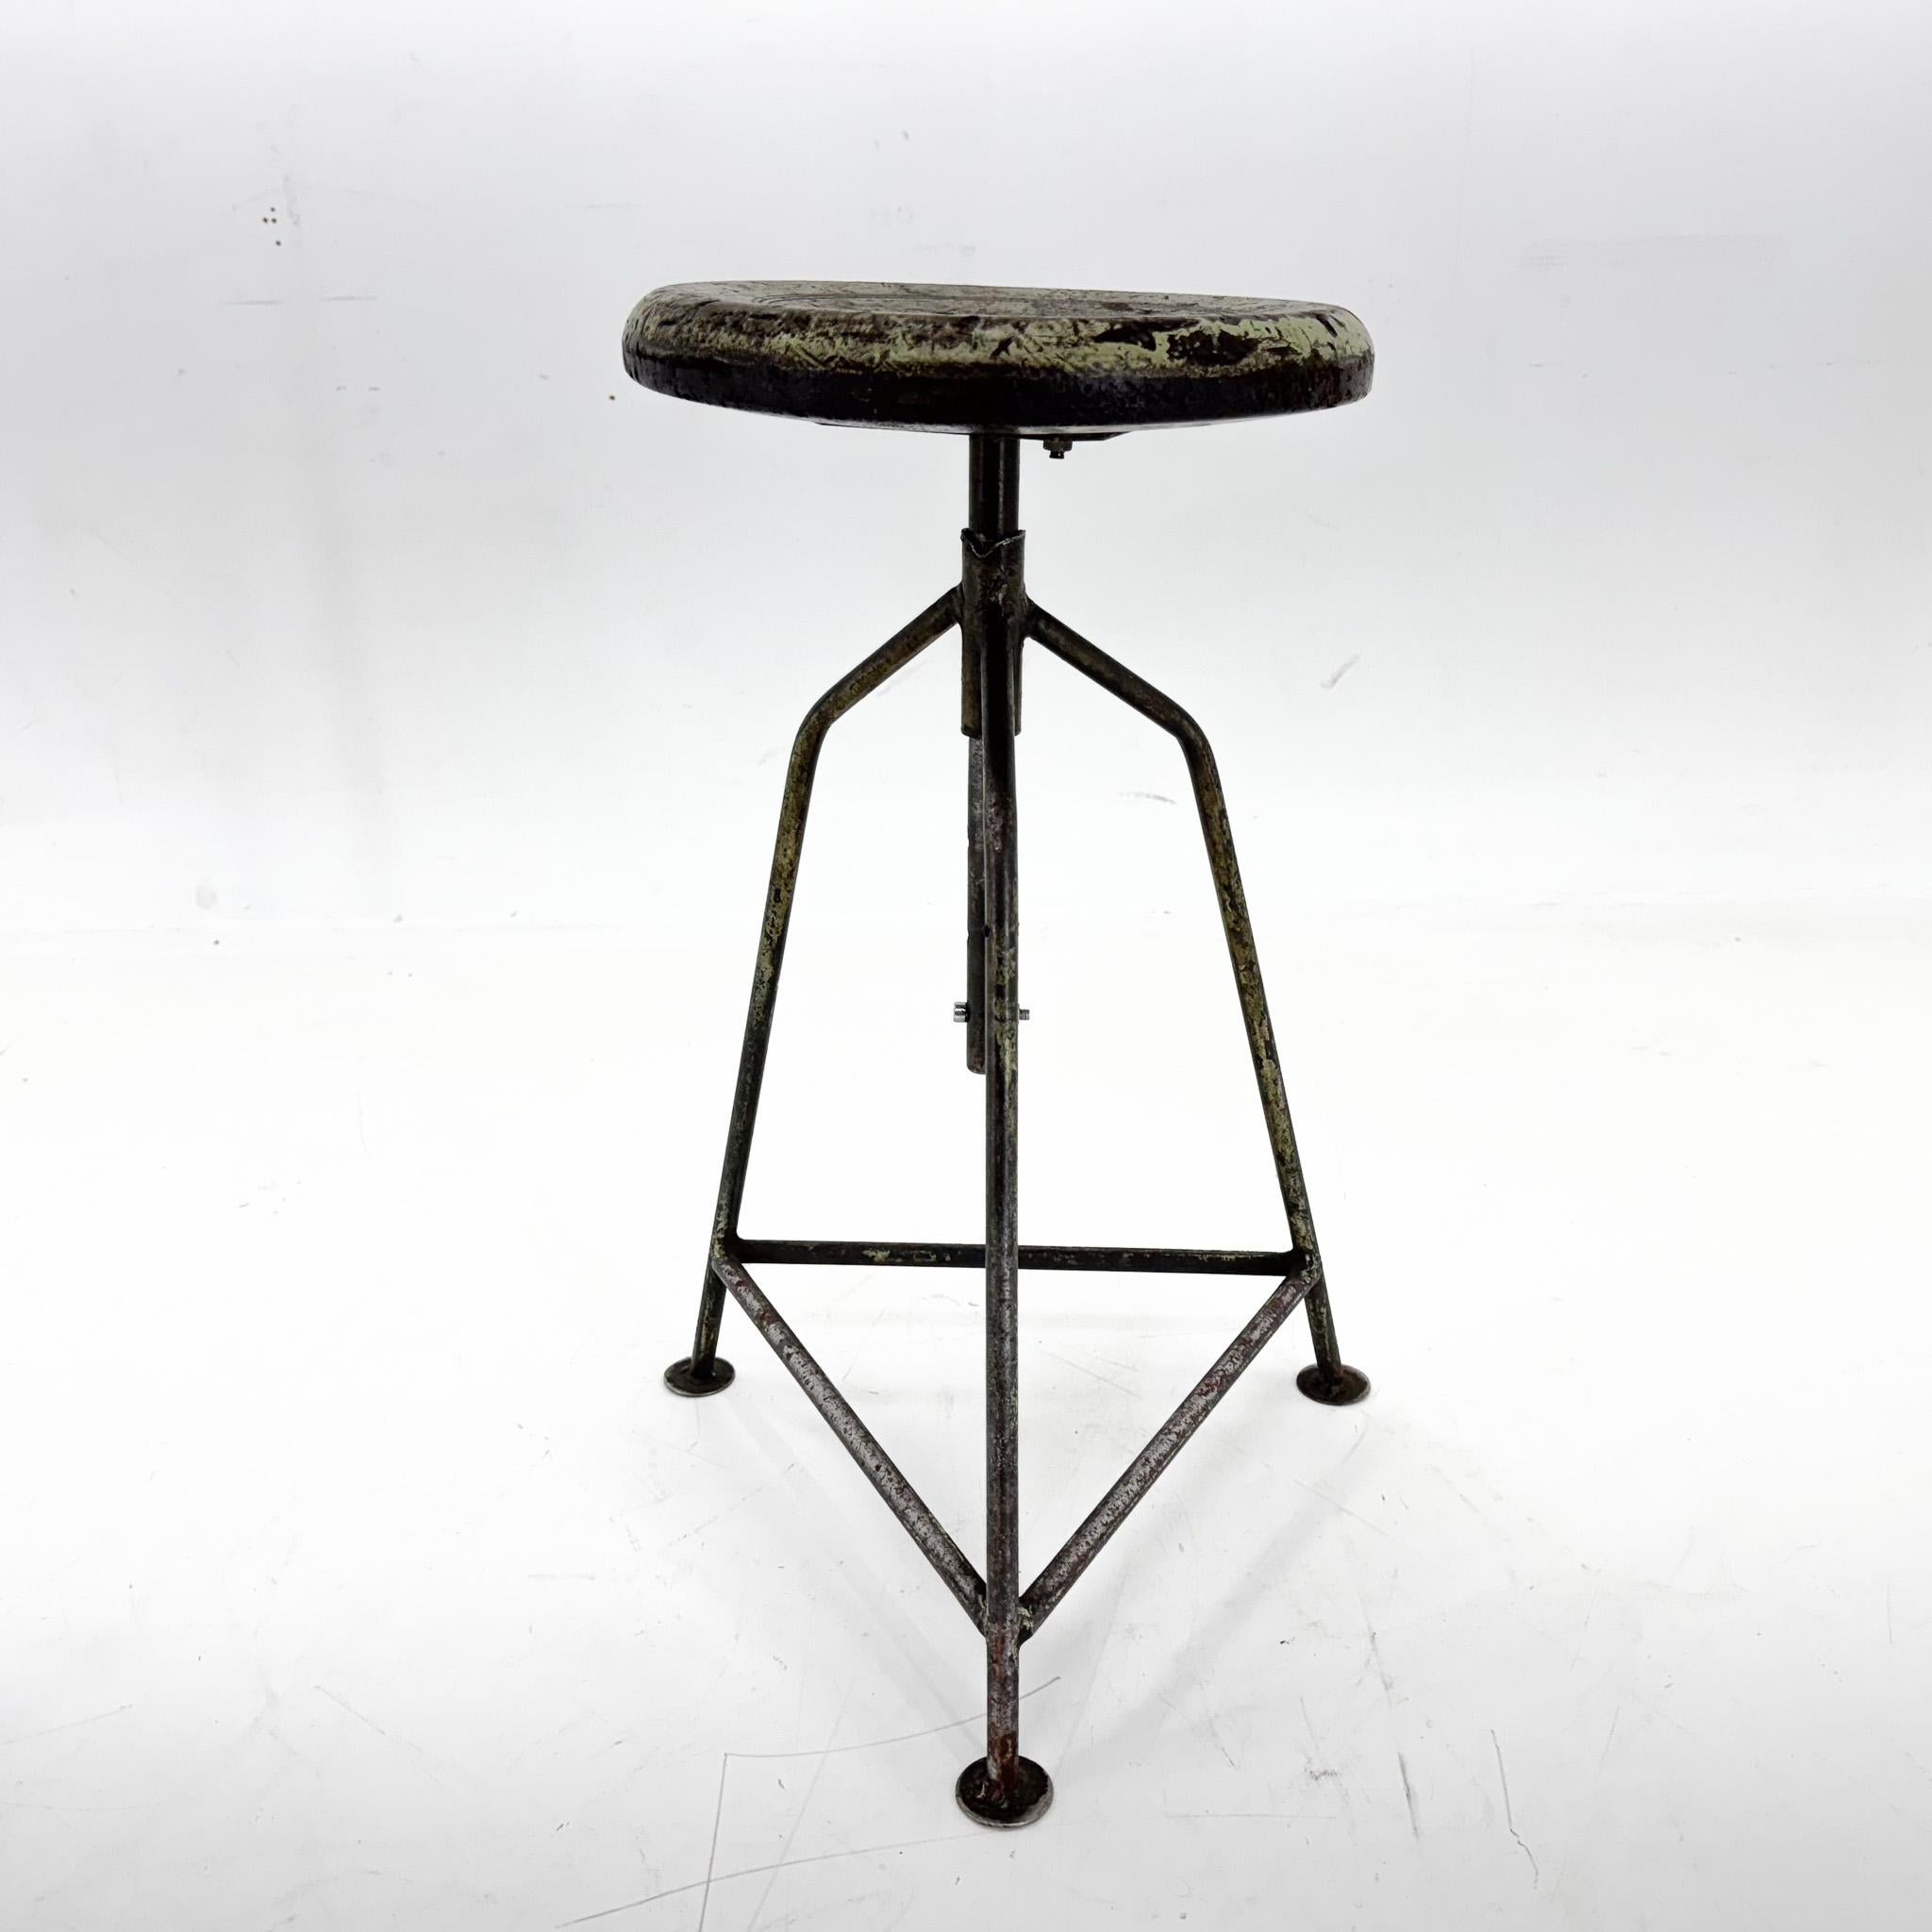 Czech Vintage Industrial Steel & Wood Tripod Stool with Original Patina, 1950's For Sale